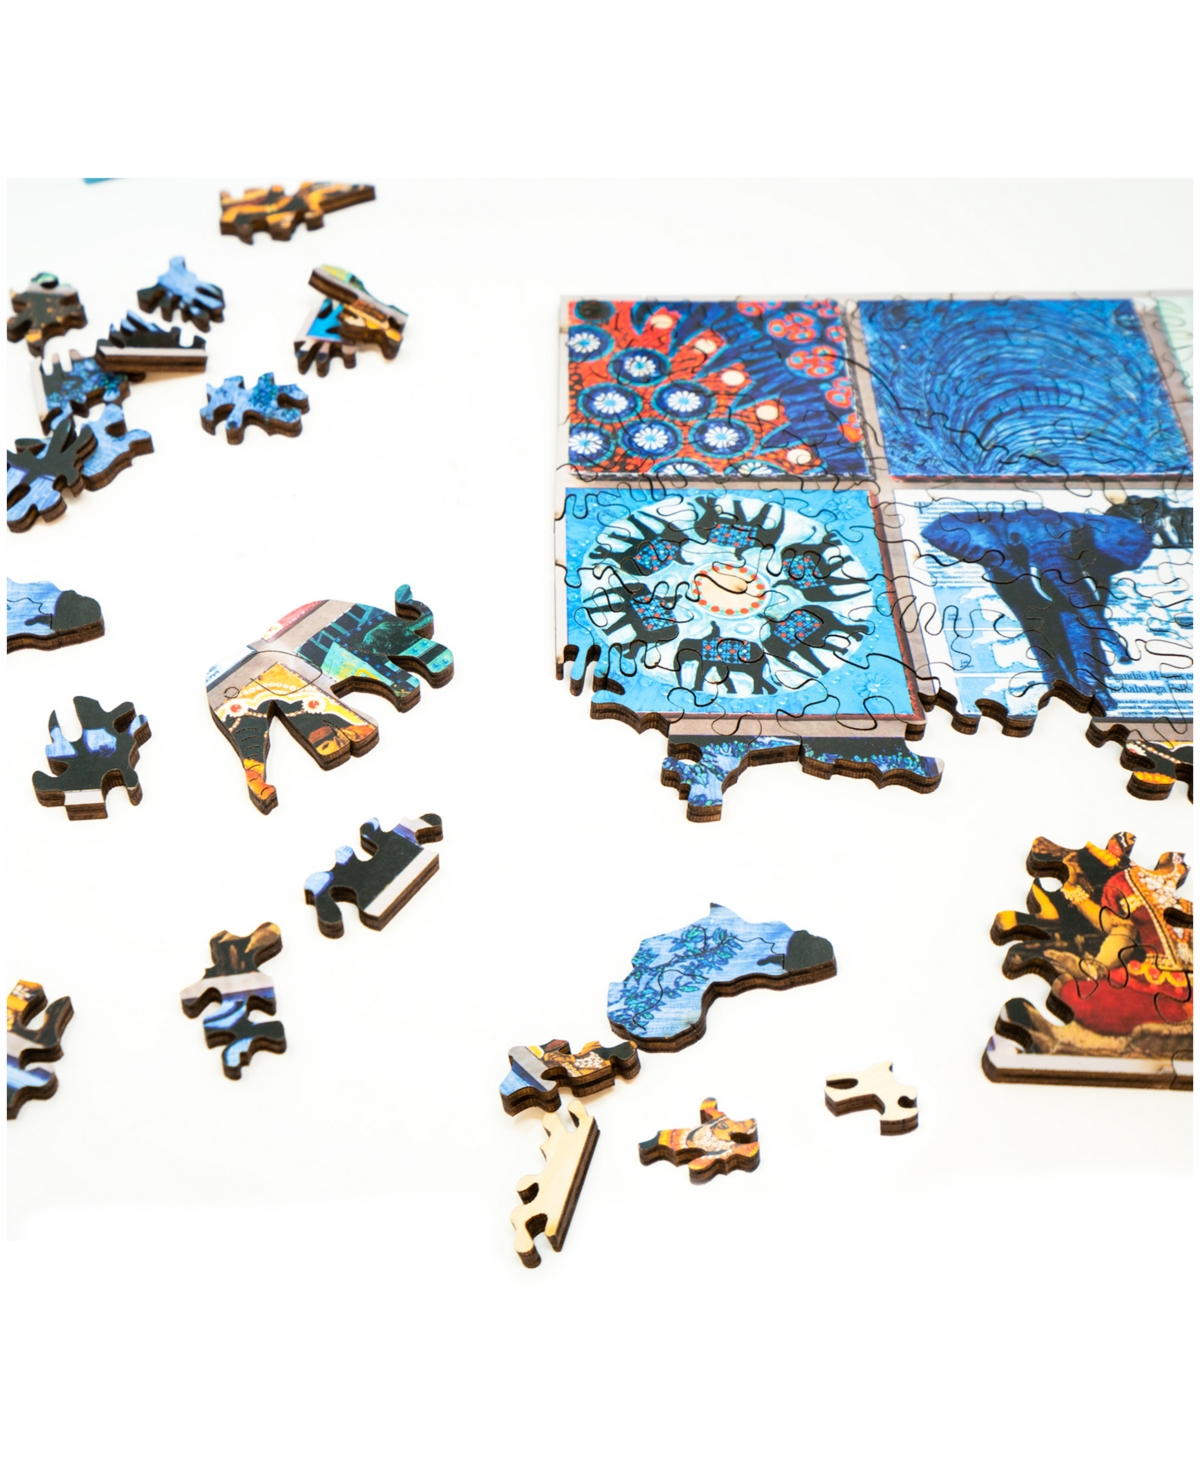 Shop University Games Areyougame.com Wooden Jigsaw Puzzle Set Elephant Sprung, 406 Pieces In No Color